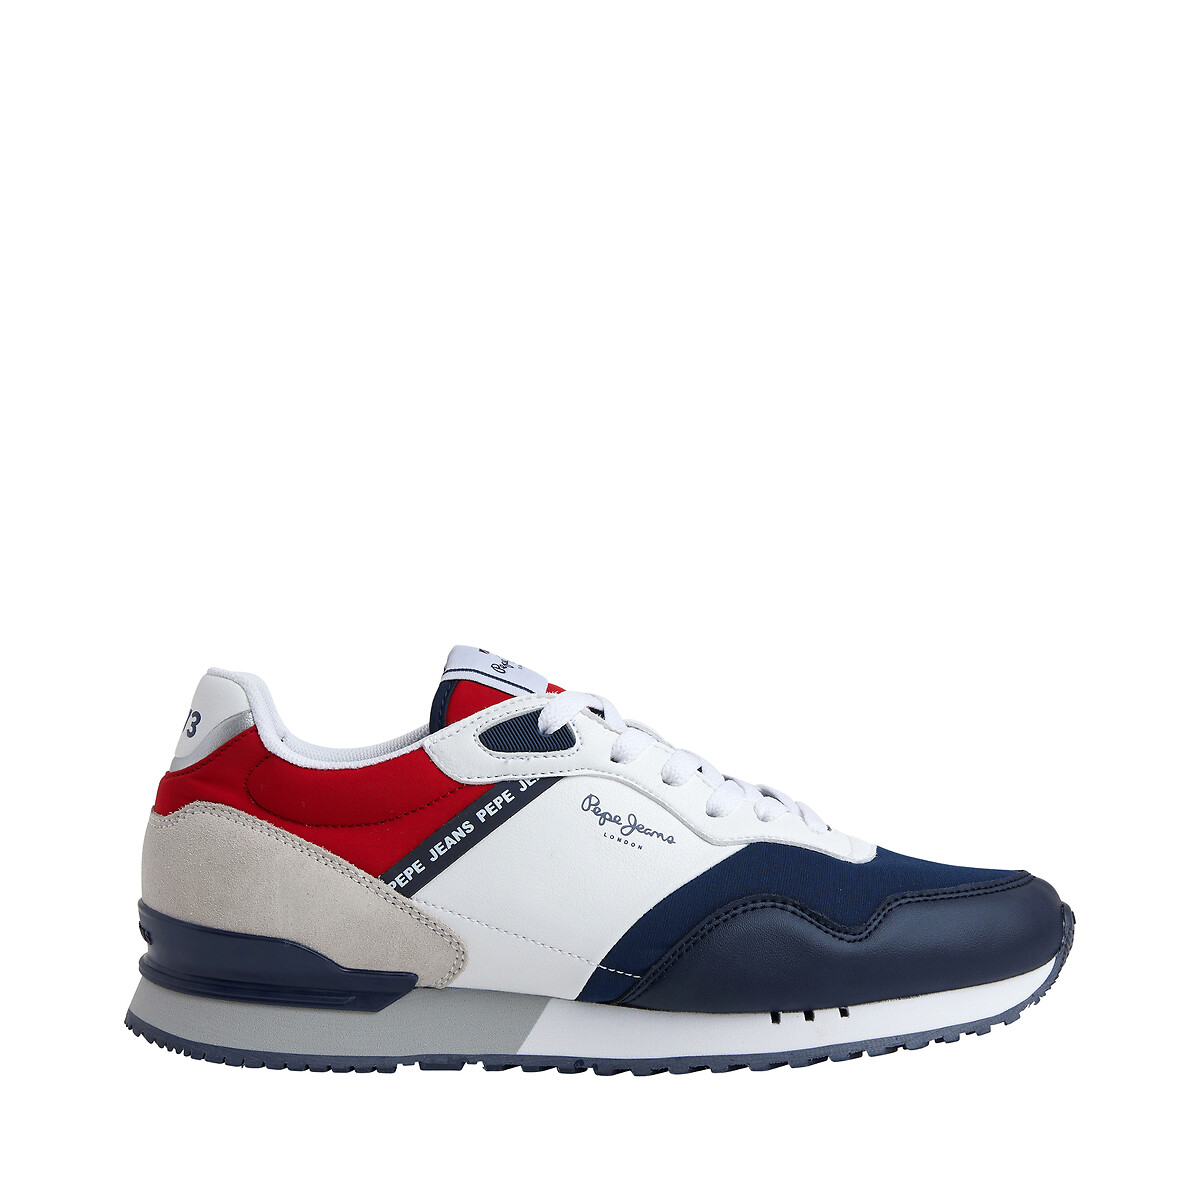 Sui Wrijven pedaal Sneakers london one blauw/wit/rood Pepe Jeans | La Redoute